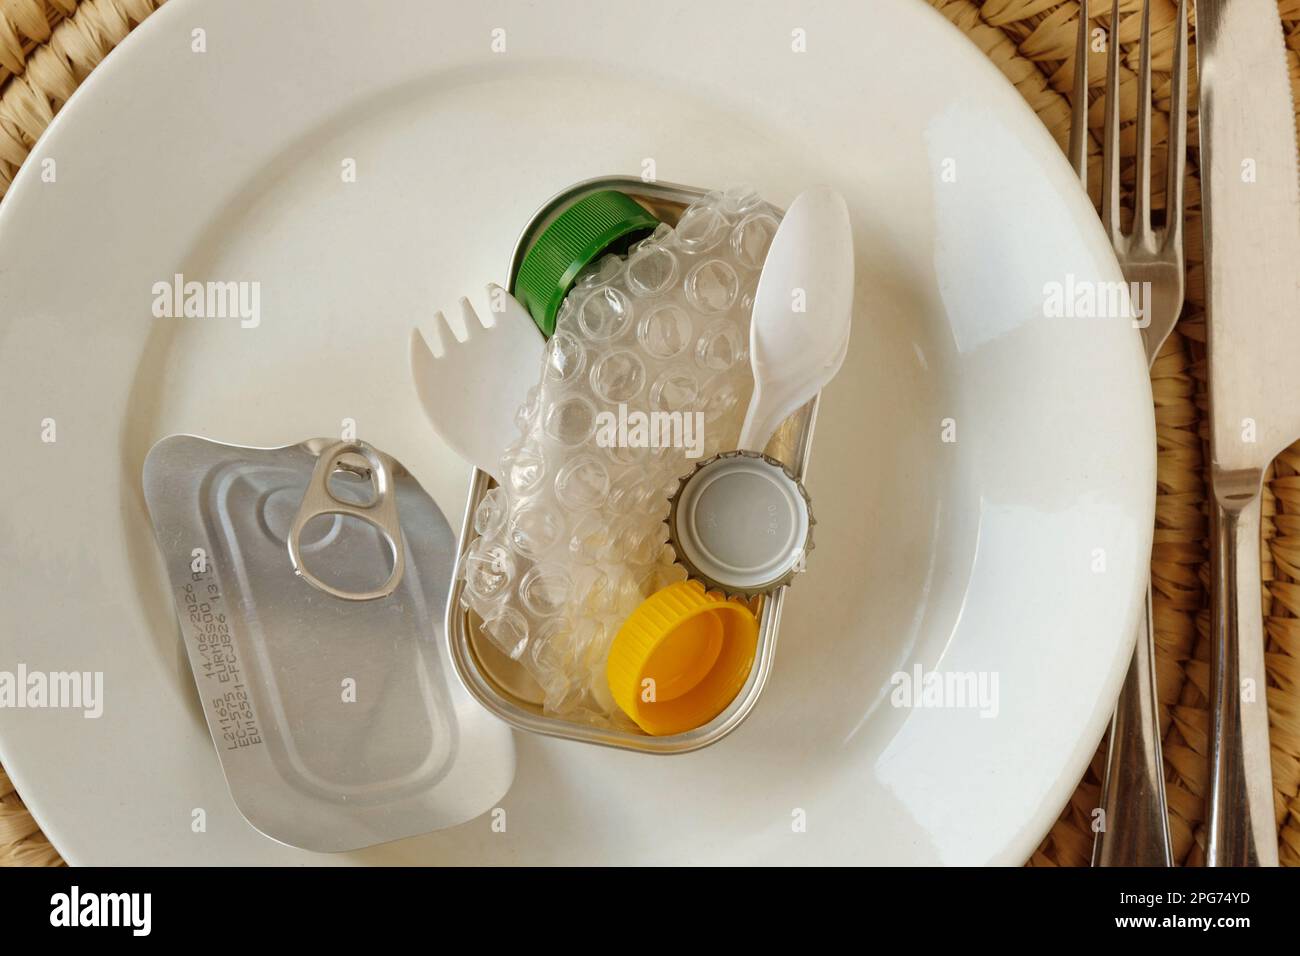 Aluminium Tuna can full of plastic trash on white plate - Concept of ecology and plastic pollution Stock Photo